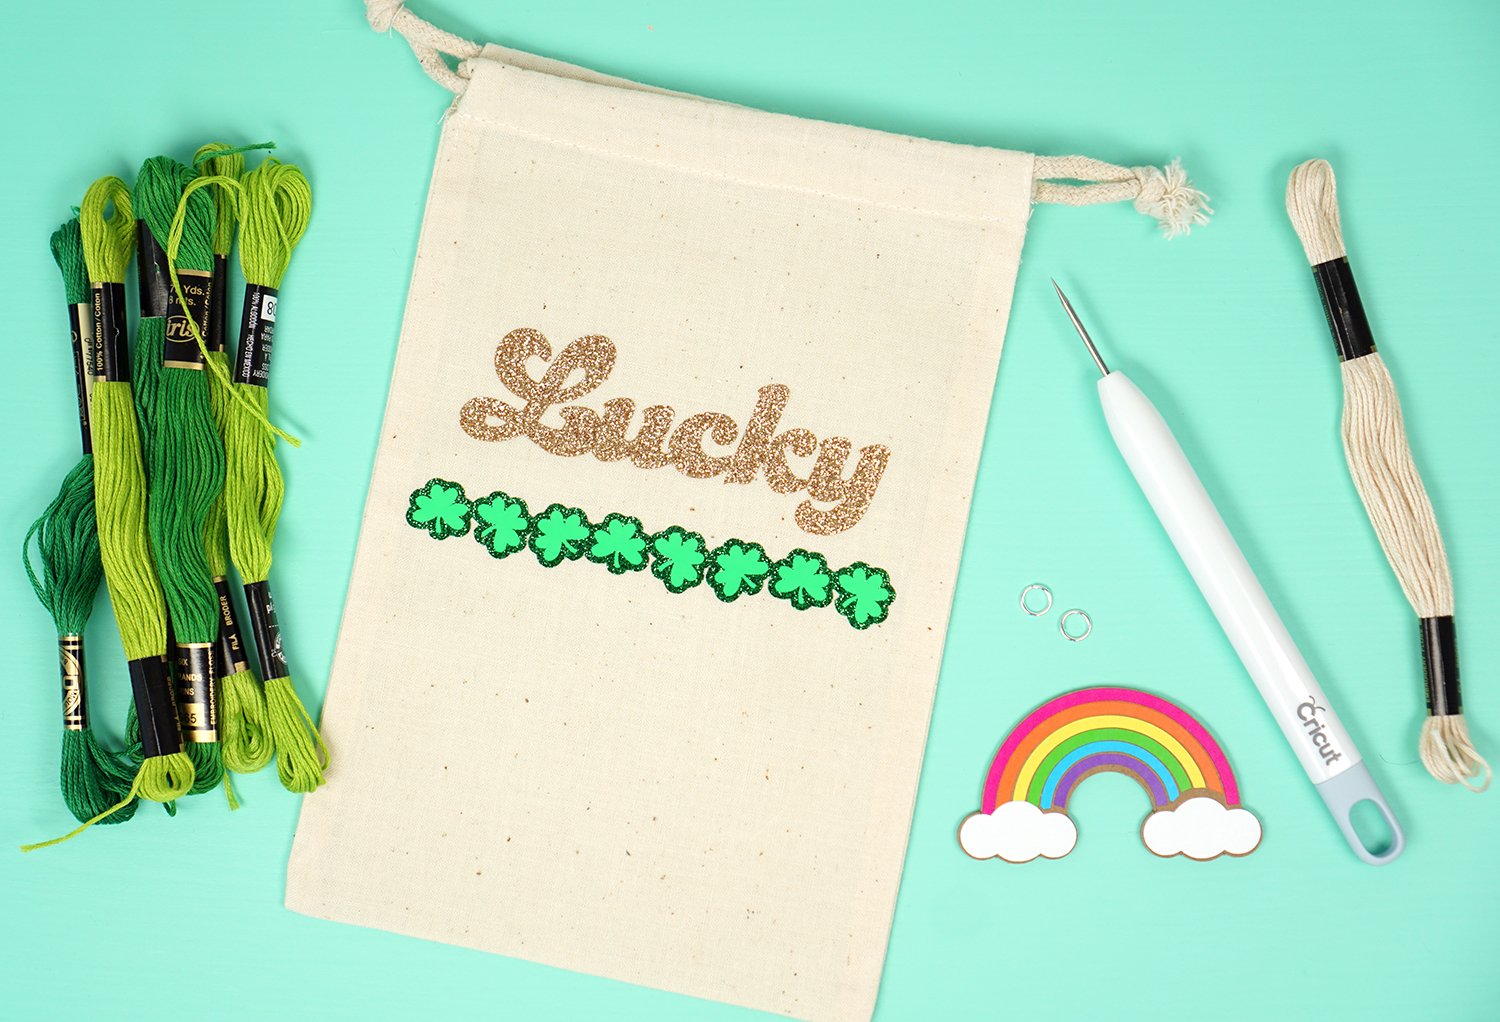 the word lucky and glitter shamrocks on treat bag